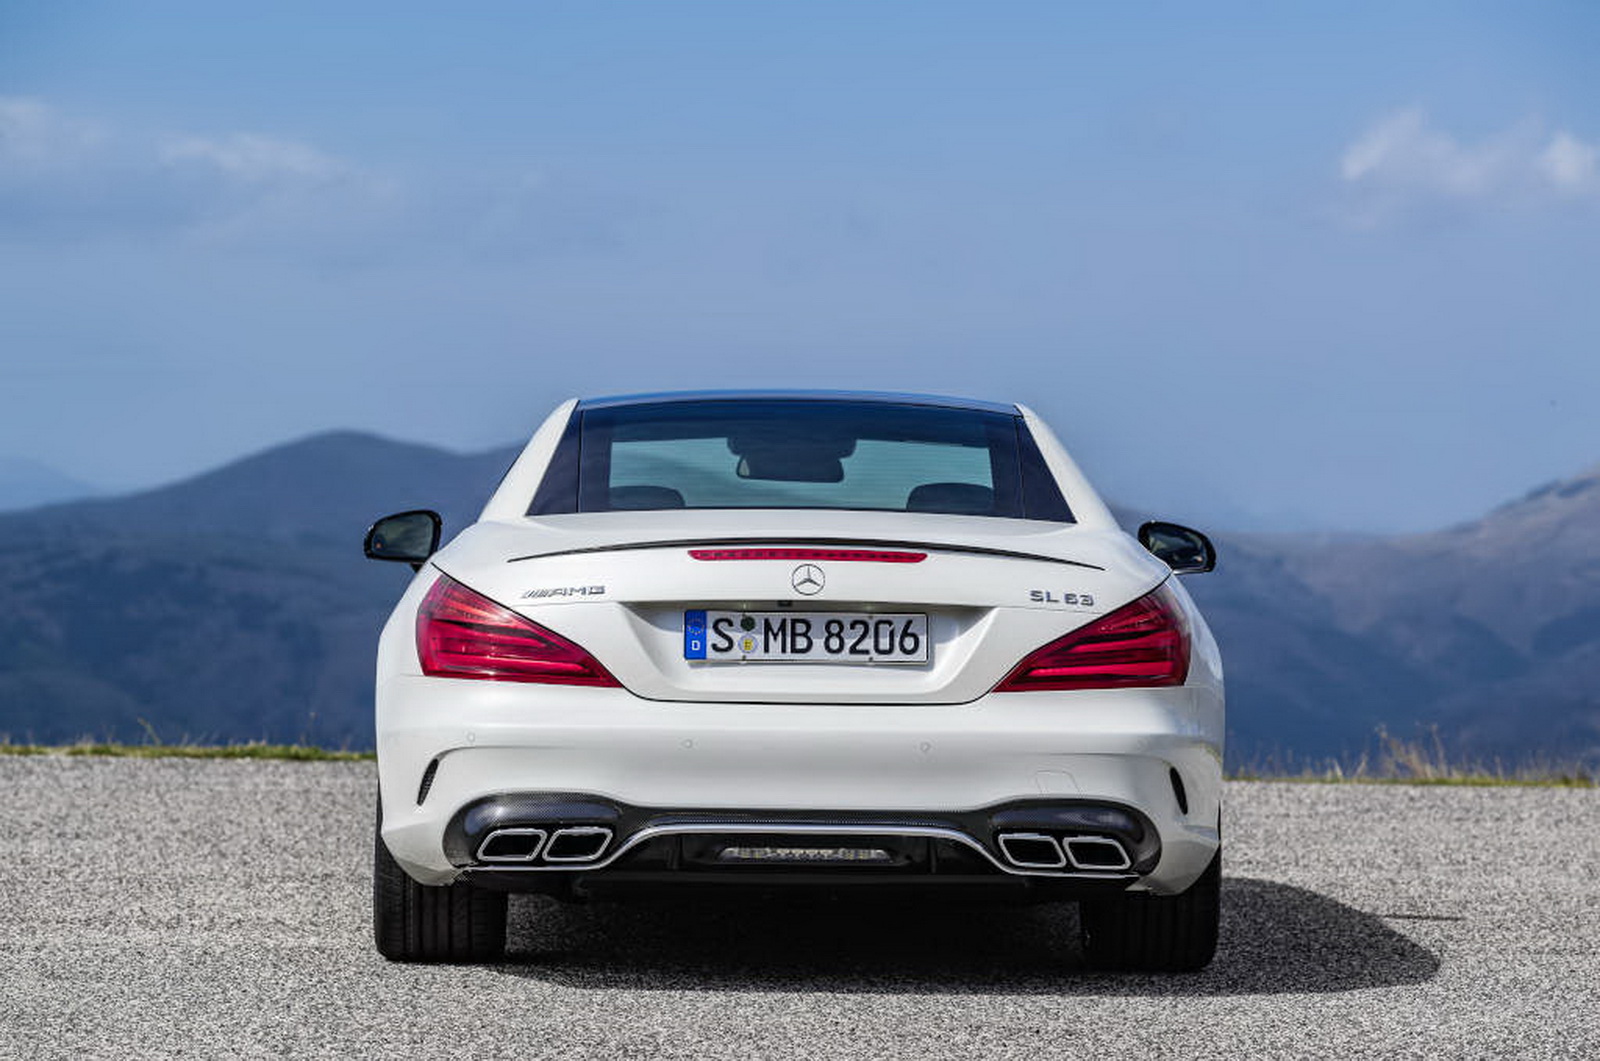 Mercedes-Benz SL-Class is going to be manufactured under the AMG performance